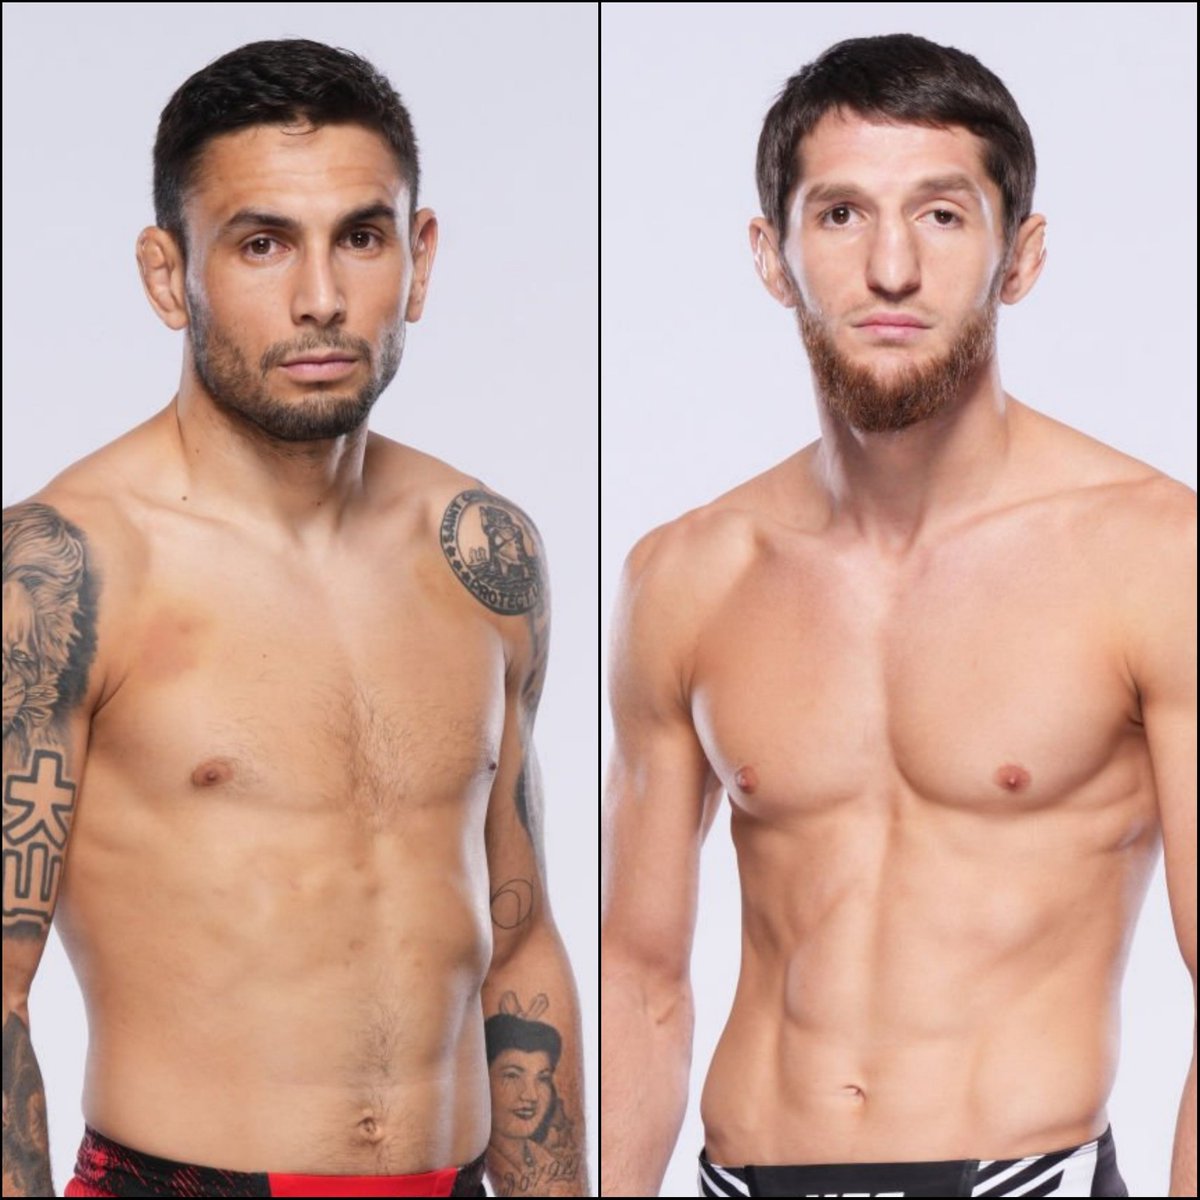 🚨🚨It's Back On🚨🚨 Alex Perez (@alexperezMMA) returns on June 15th at #UFCVegas93. He takes on Tagir Ulanbekov (@Ulanbekov_Tagir) in the flyweight division.